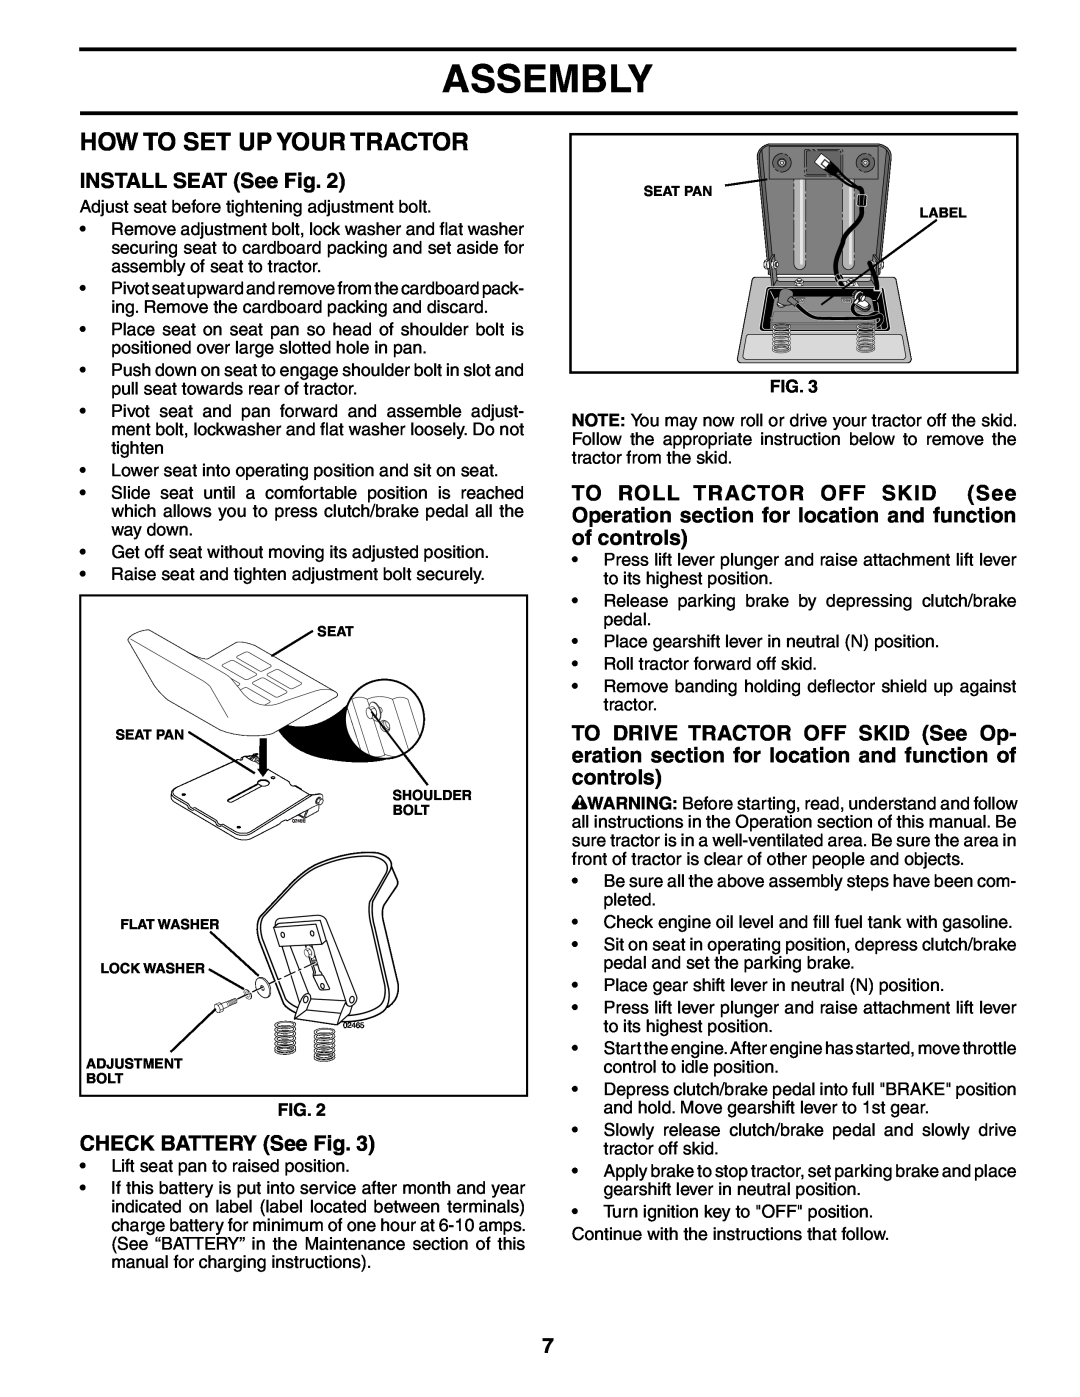 Weed Eater 187637 manual How To Set Up Your Tractor, INSTALL SEAT See Fig, CHECK BATTERY See Fig, Assembly 